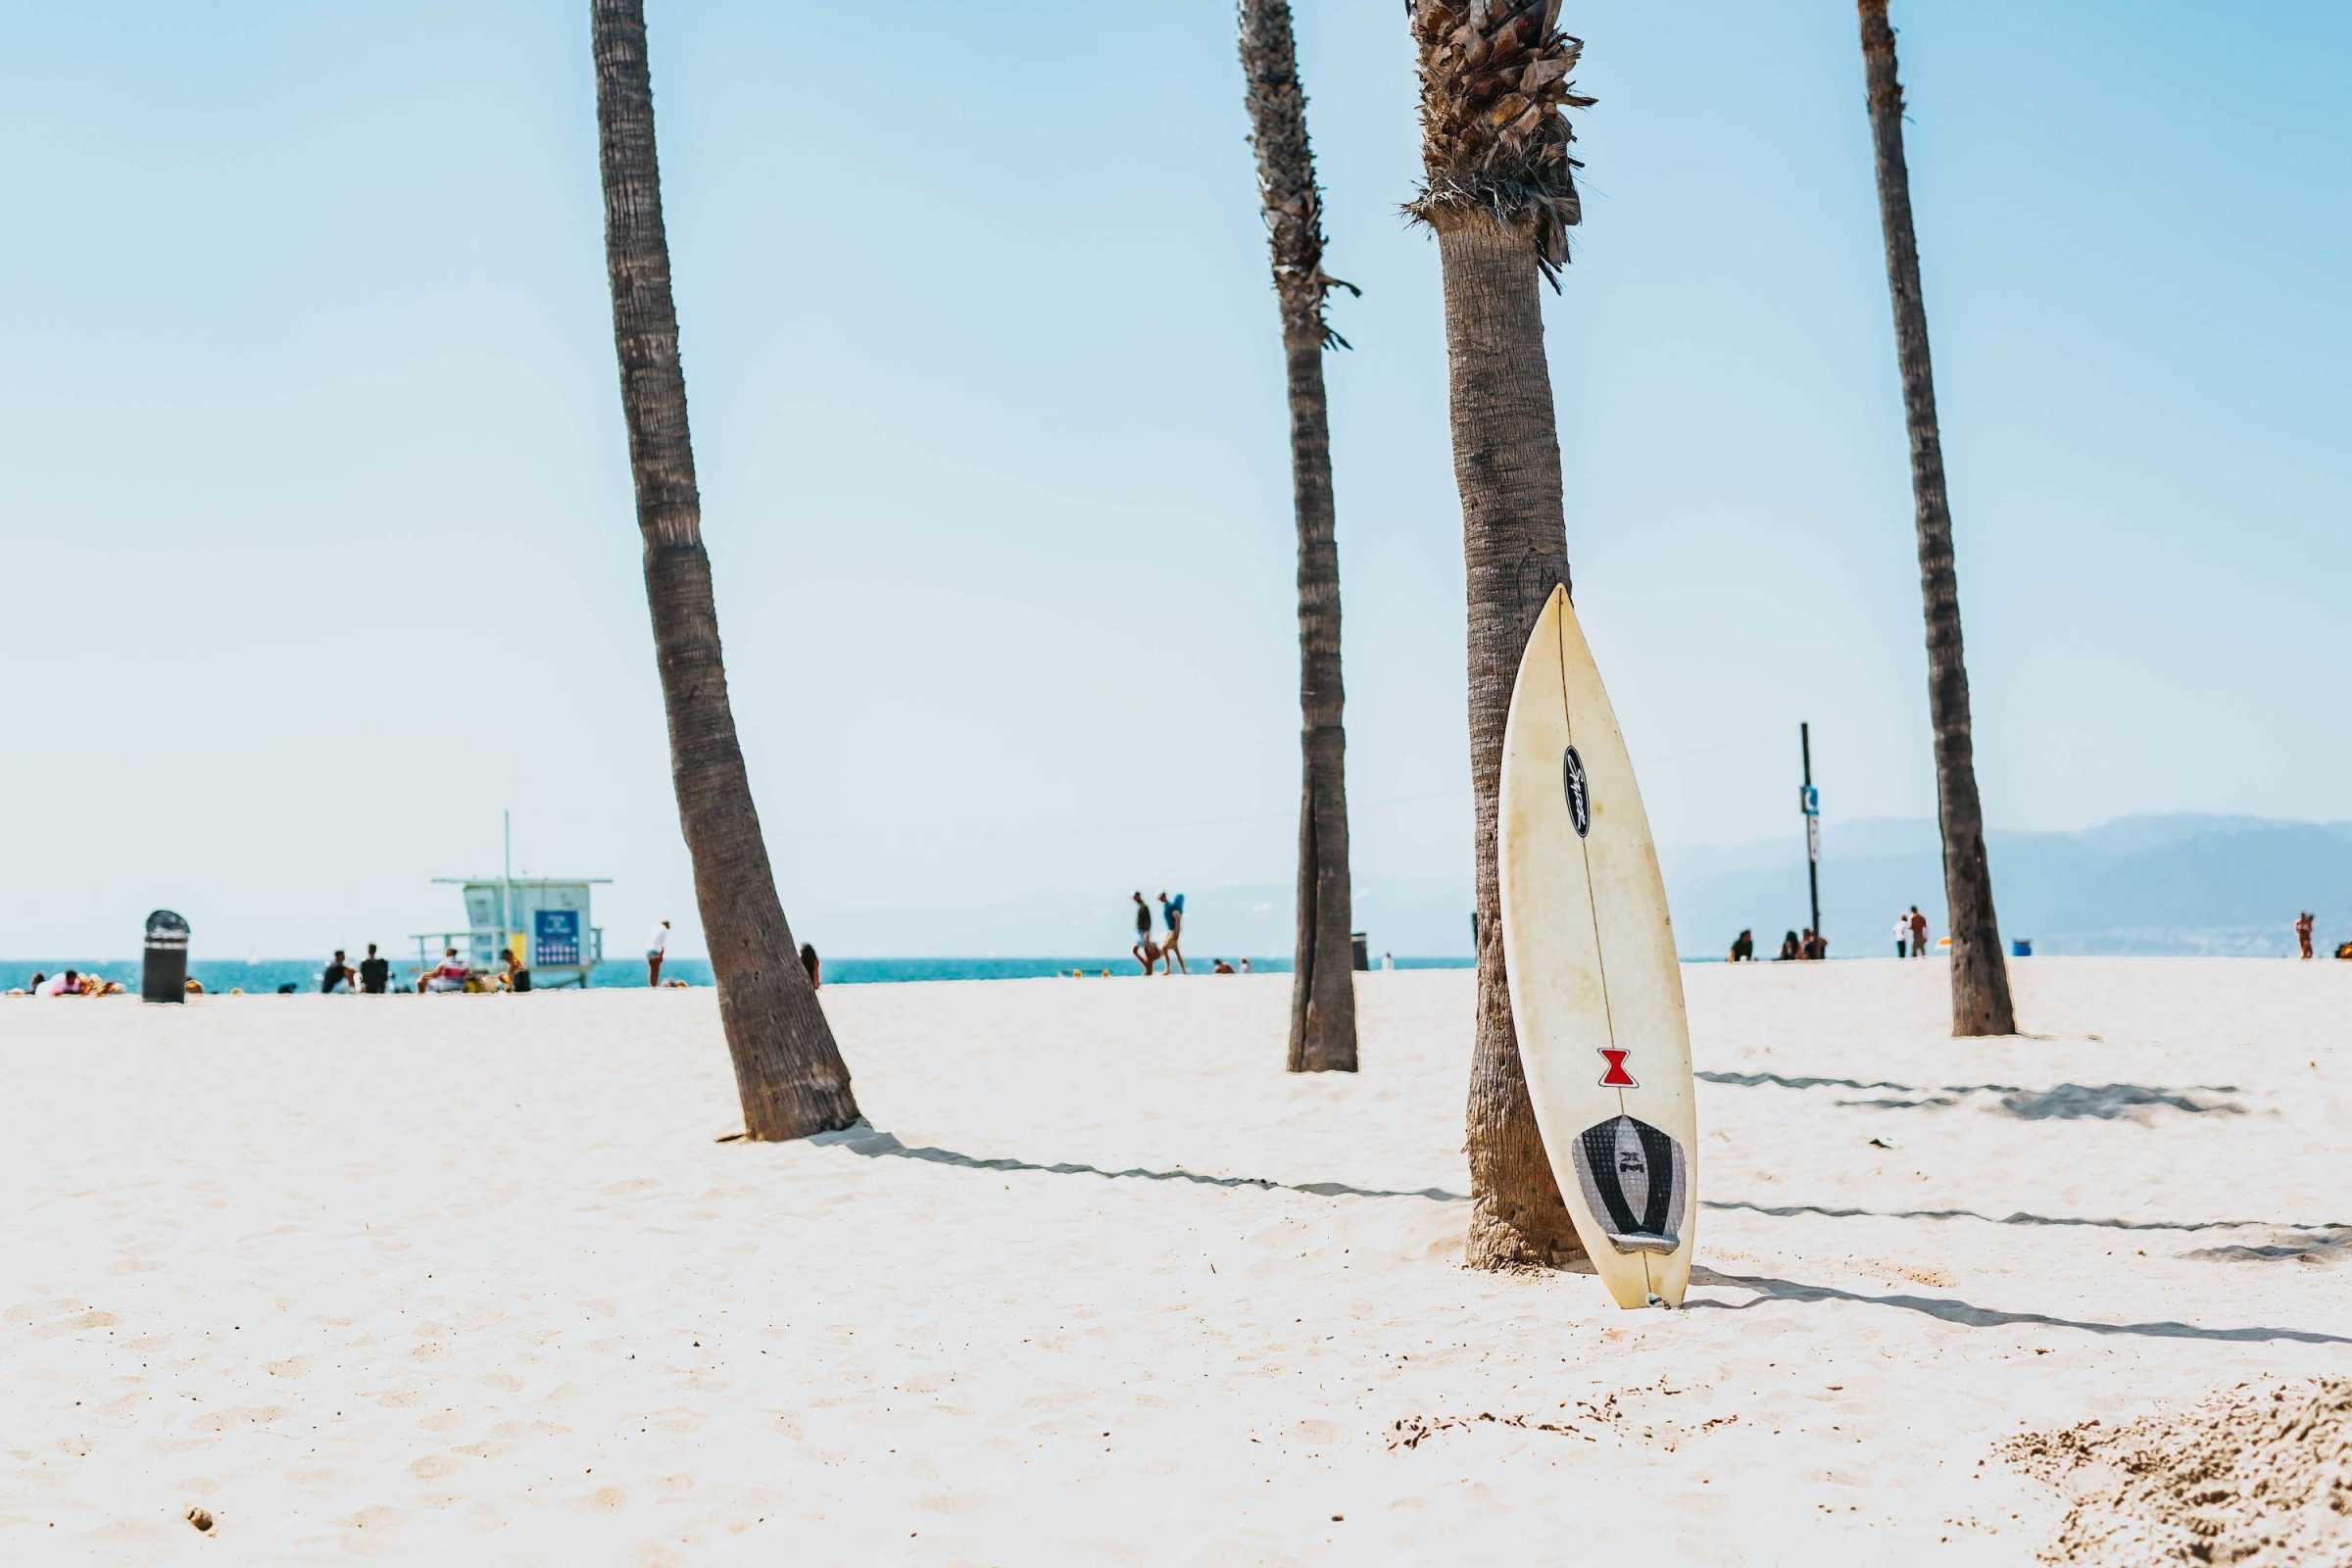 A surfboard is leaning against the side of palm trees - Beach, Florida